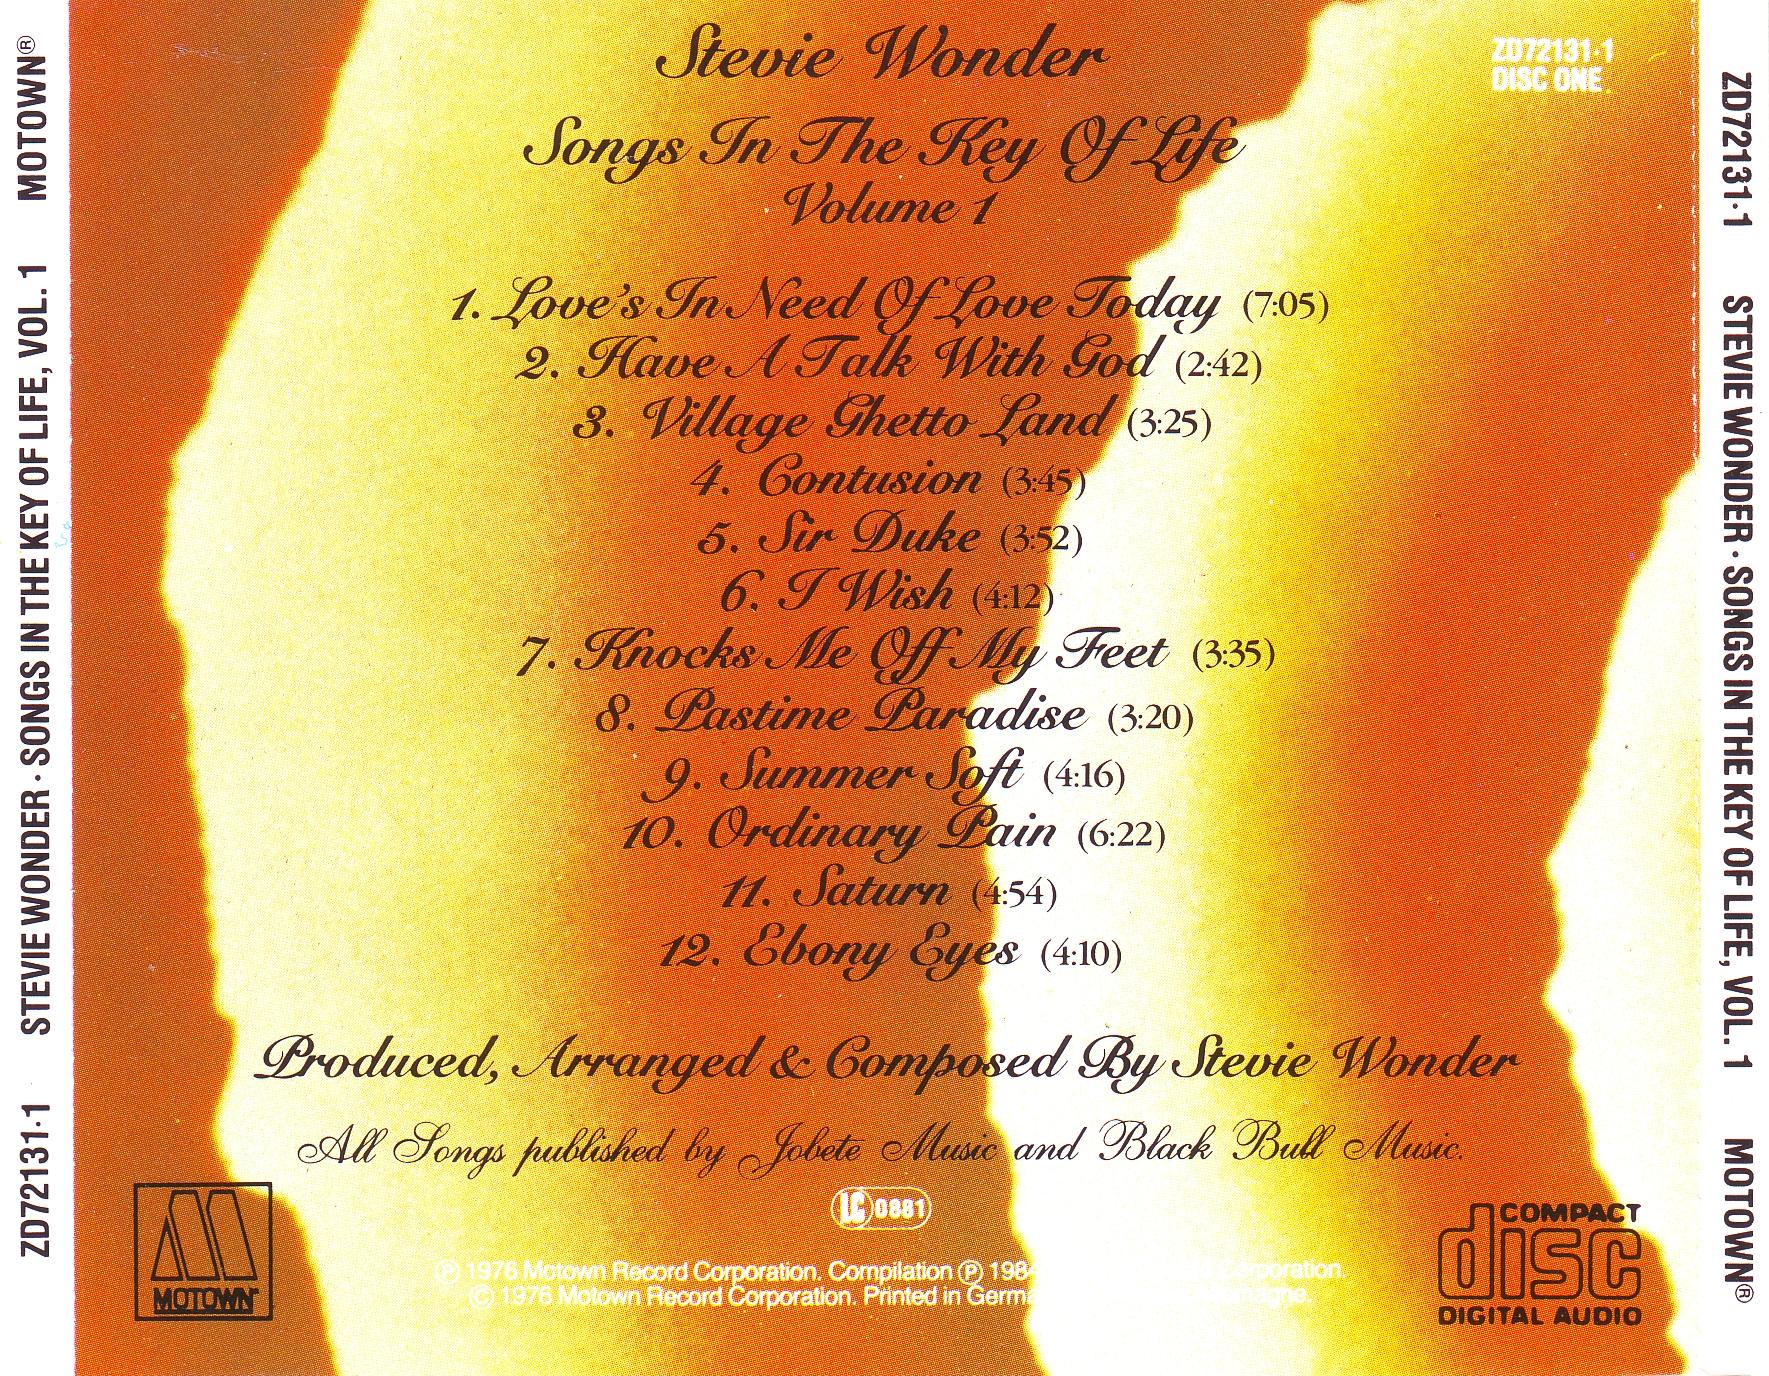 stevie wonder songs in the key of life download mp3